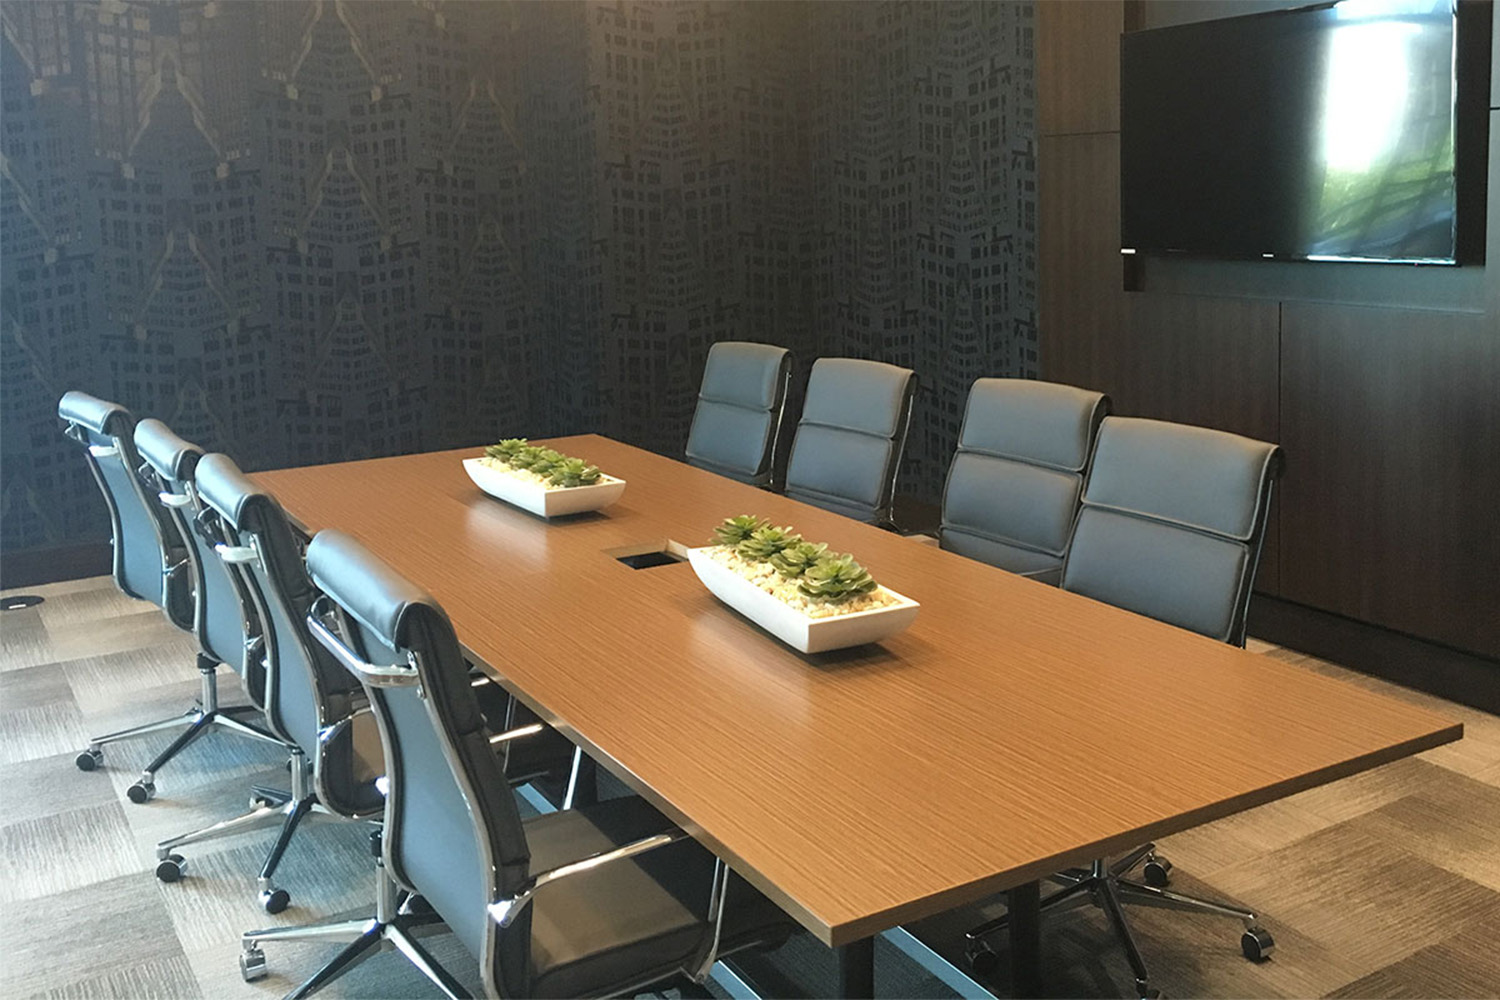 Empty conference room with carpet checkerboard flooring, and black walls